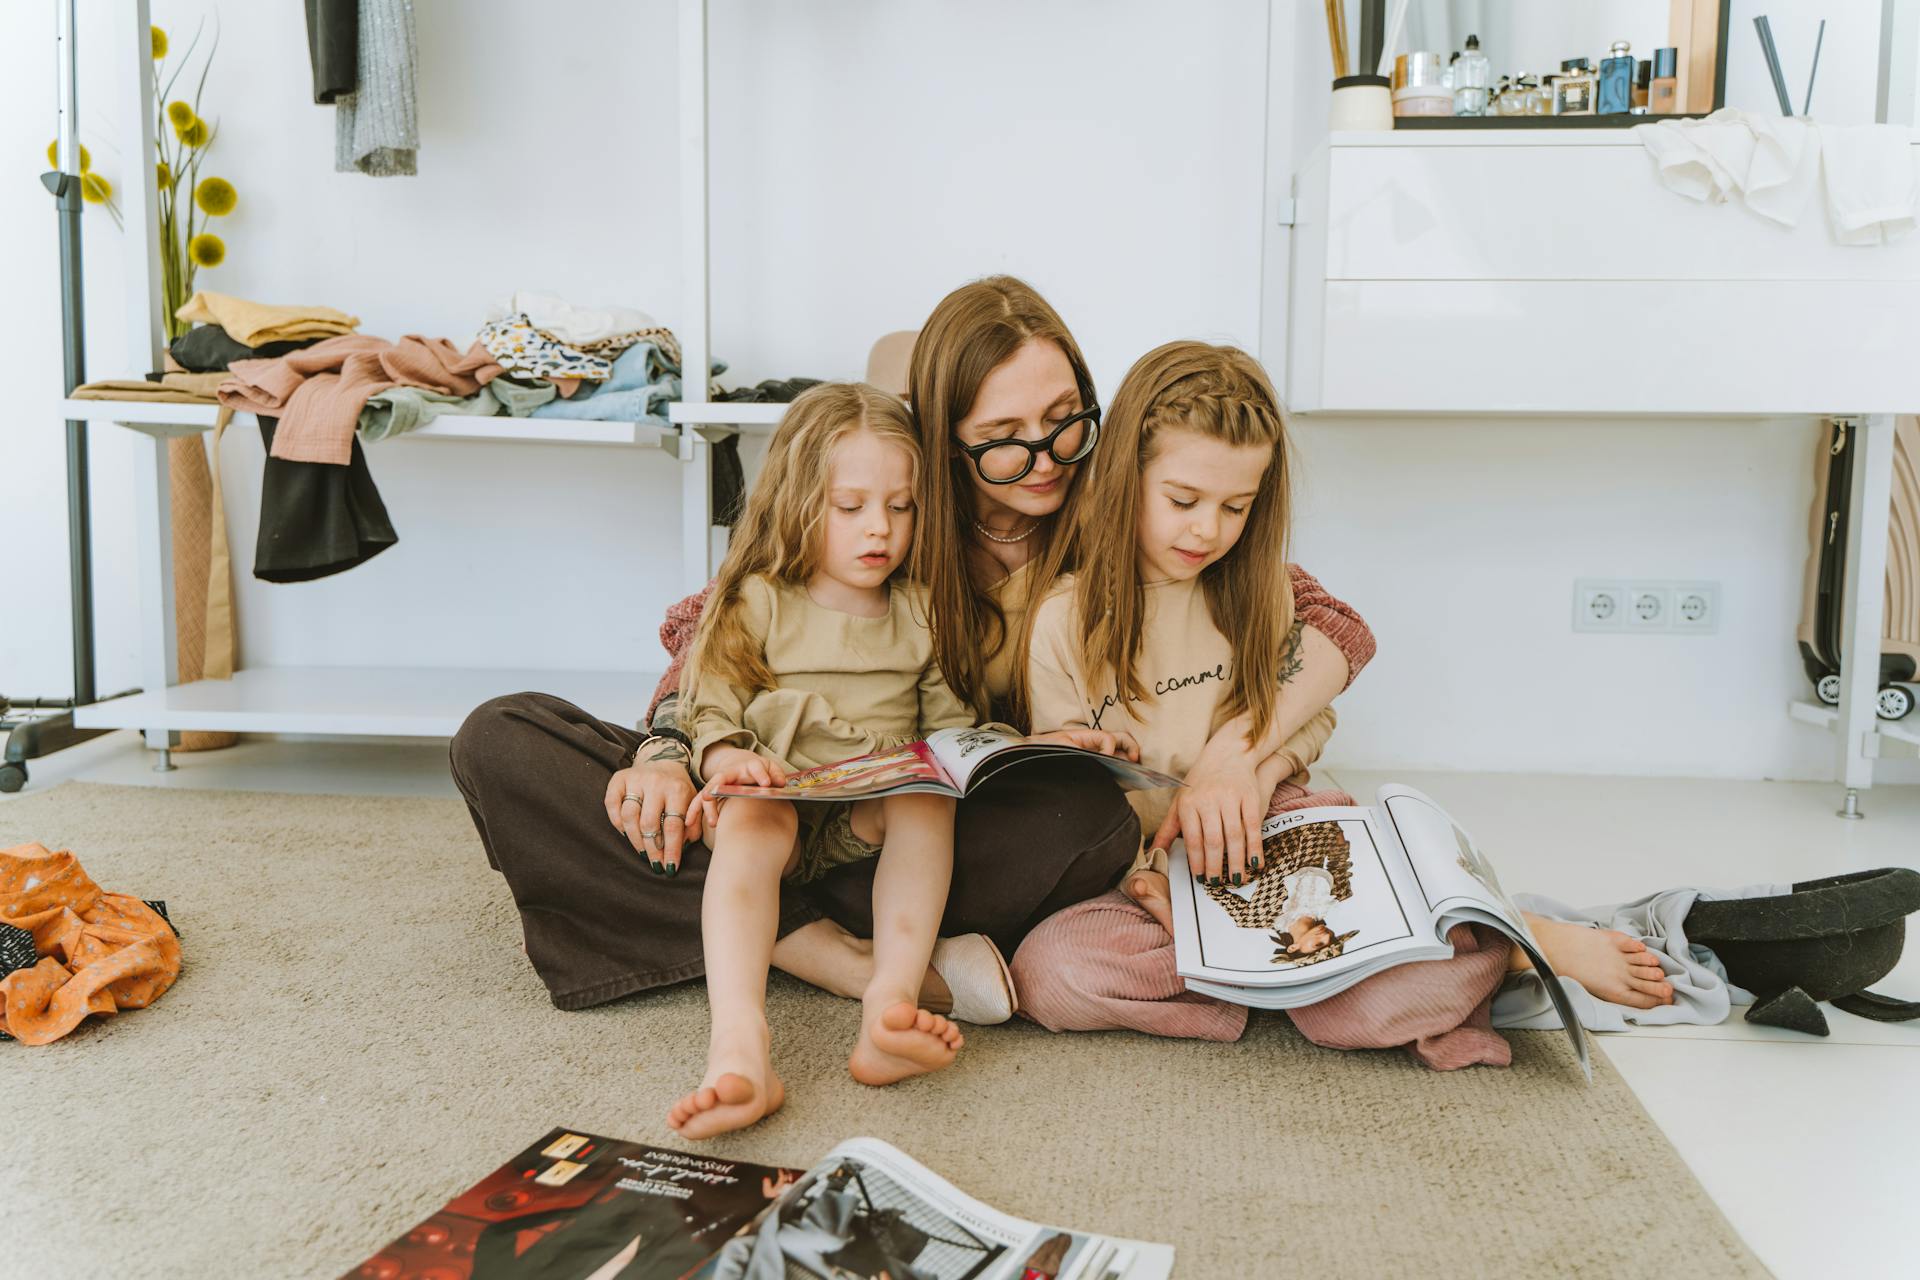 A woman sifting through magazines with her little daughters | Source: Pexels